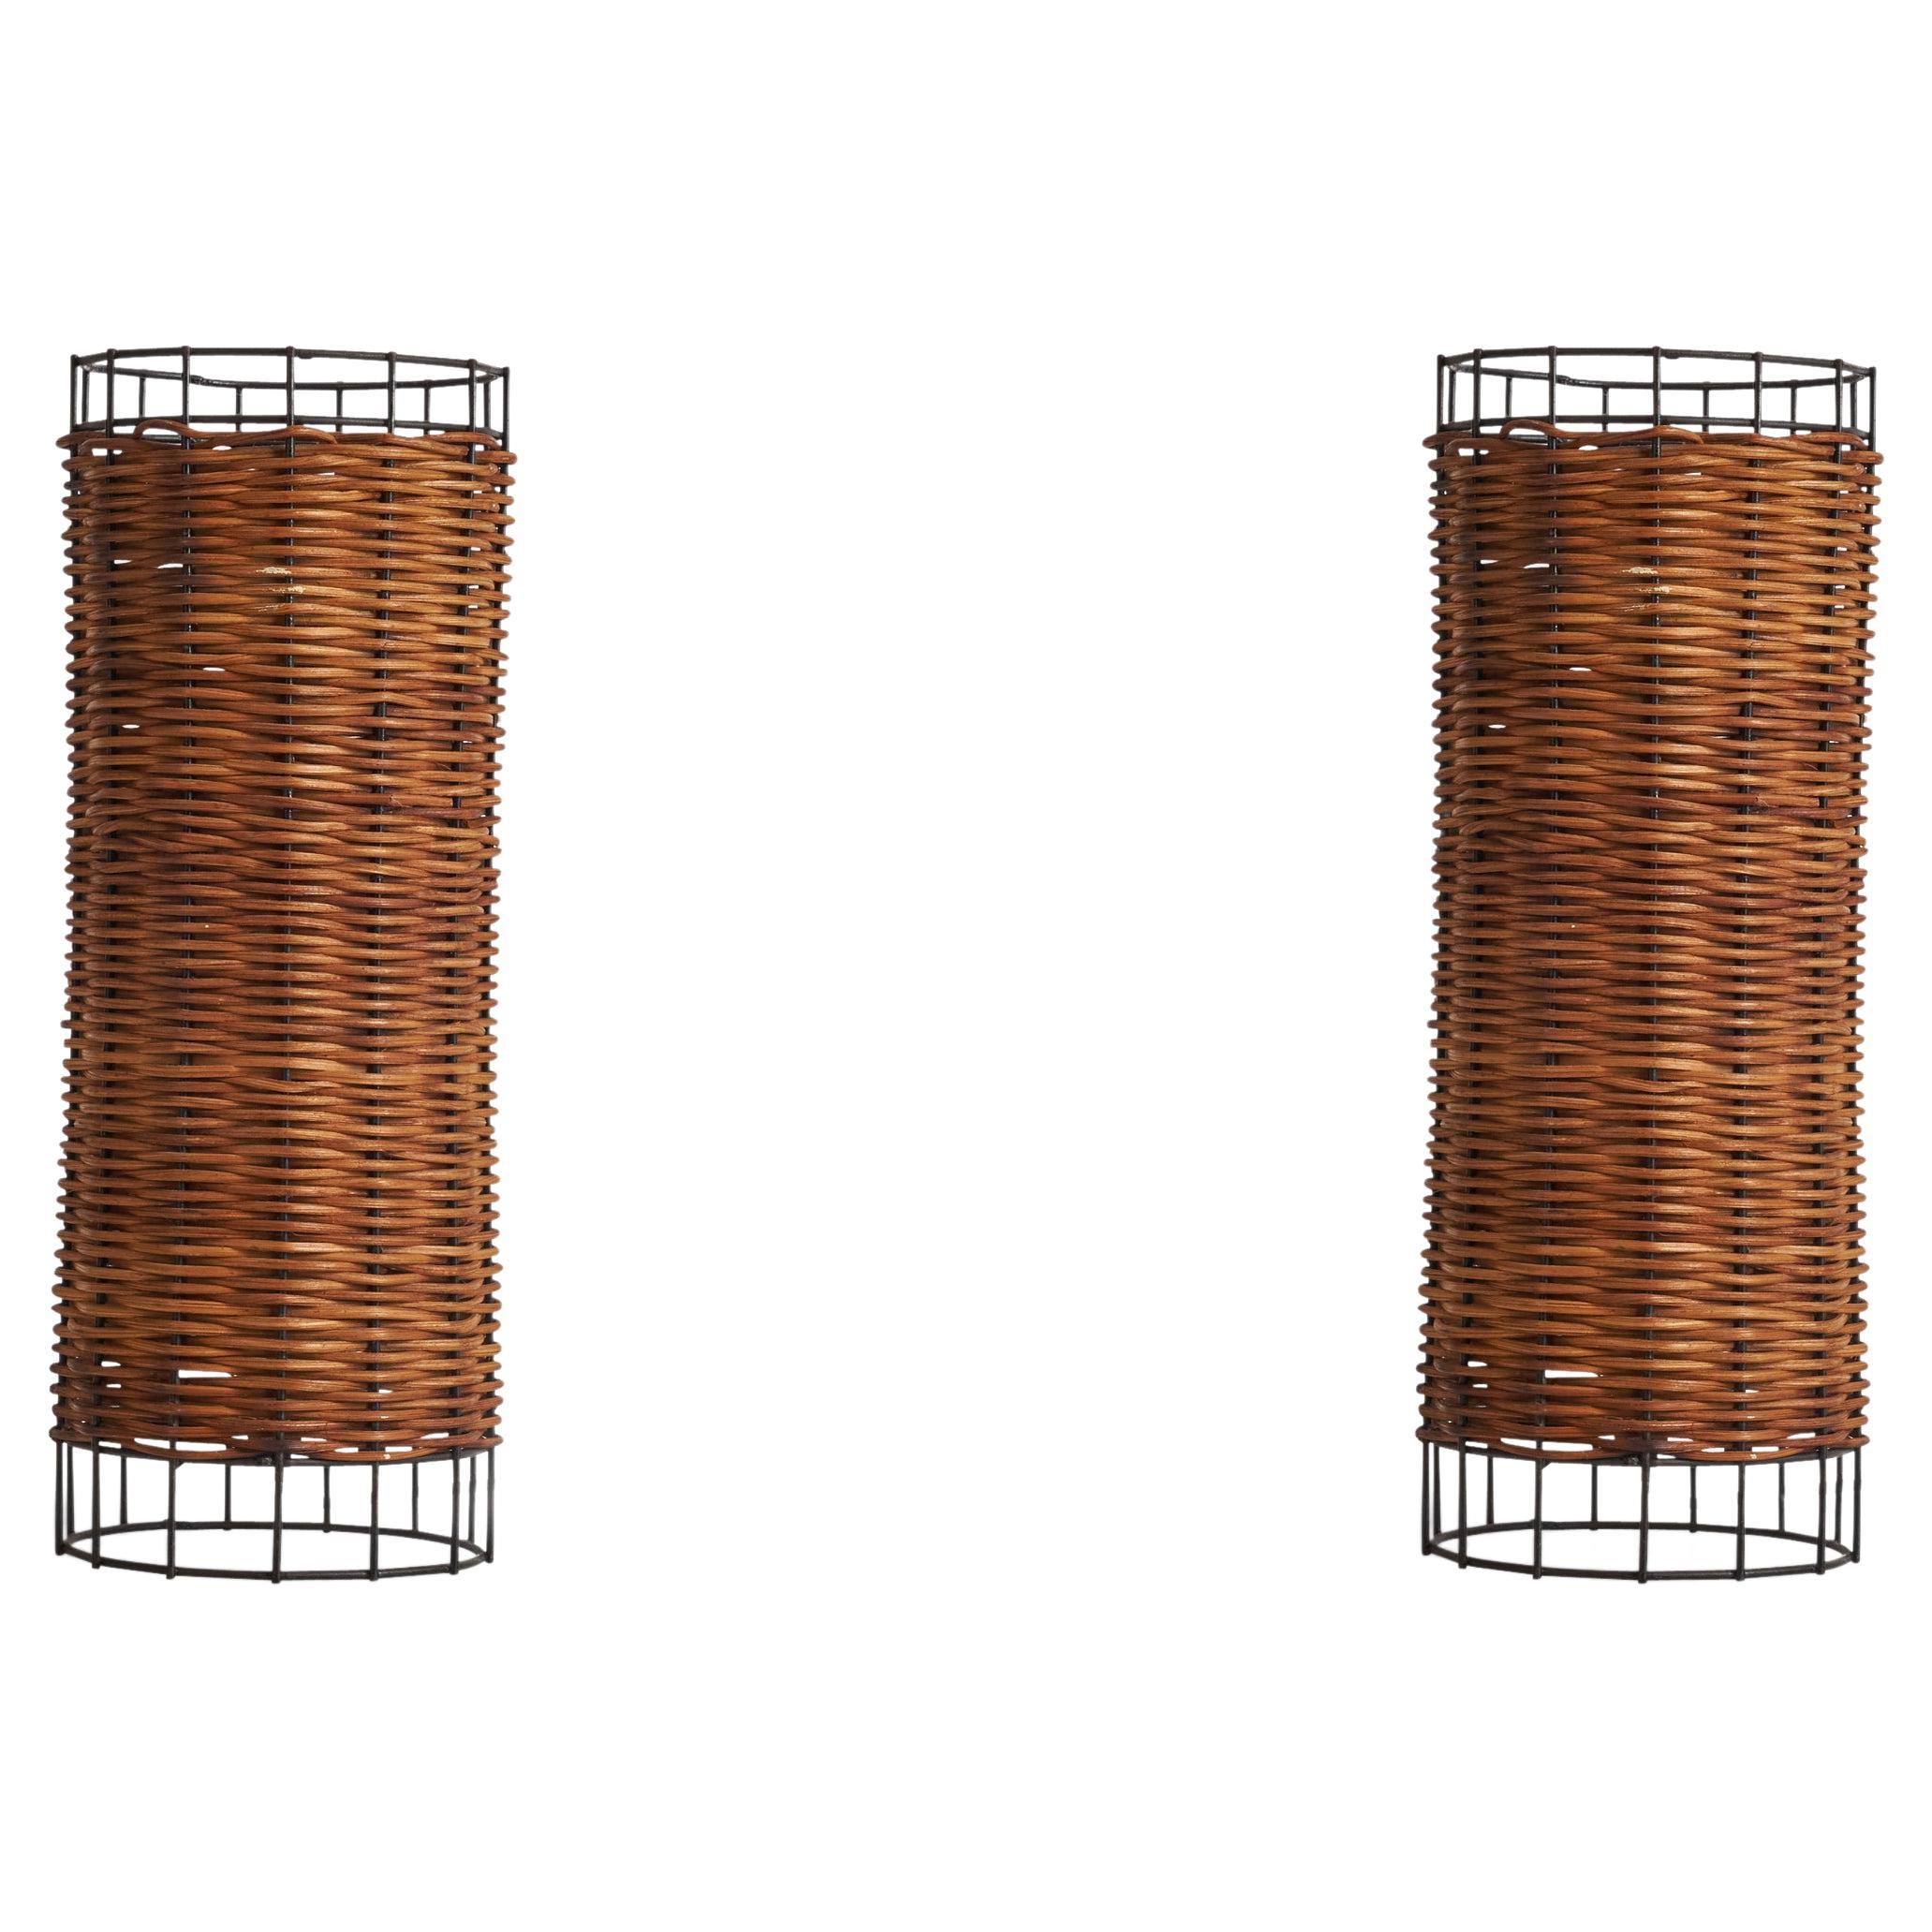 American Designer, Table Lamps, Lacquered Metal, Rattan, USA, 1950s For Sale